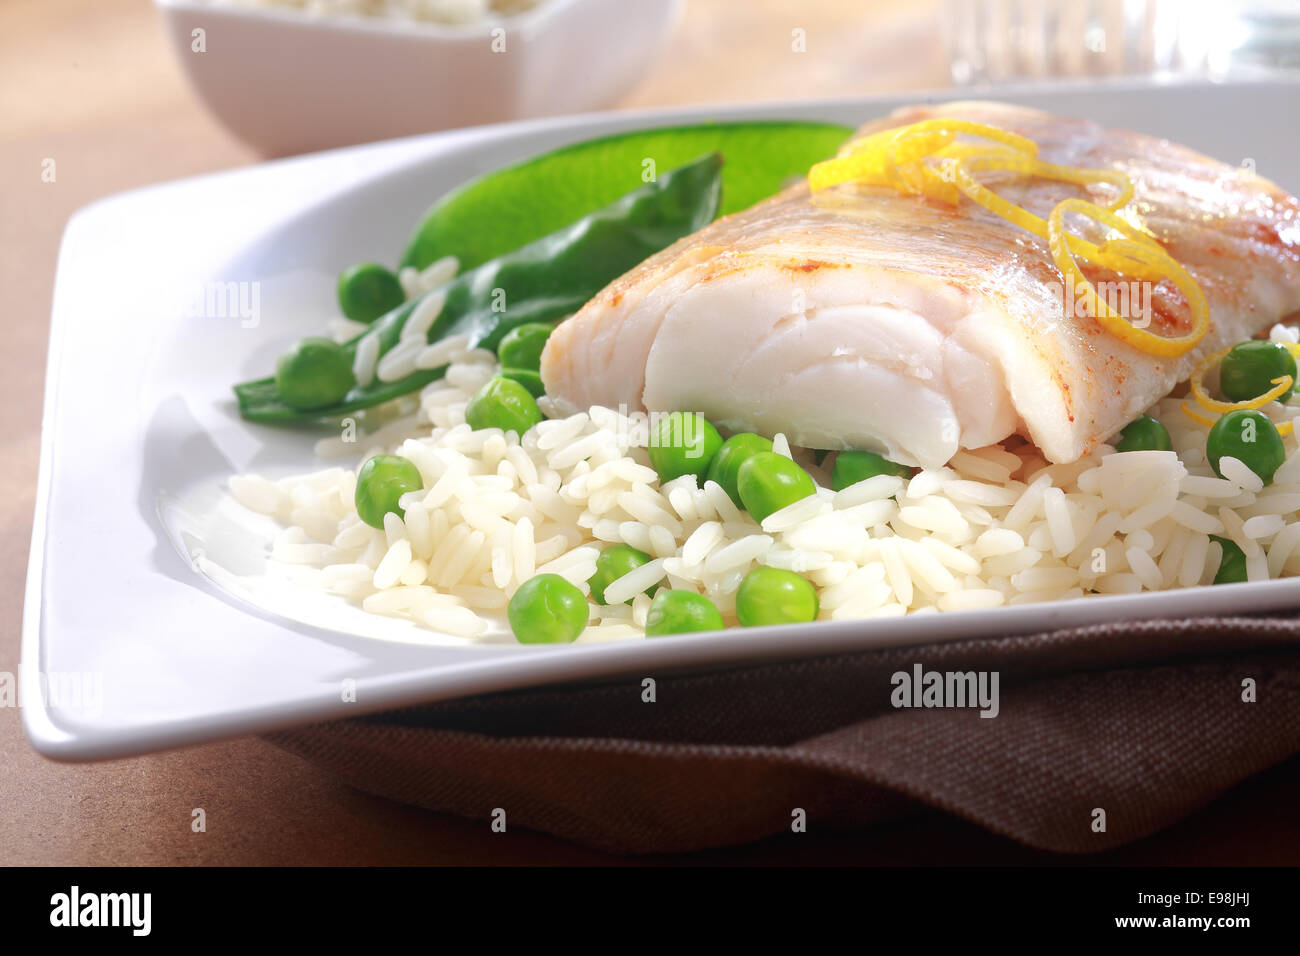 Healthy meal of baked fish fillet garnished with fresh lemon zest, rice and peas served on a white plate Stock Photo